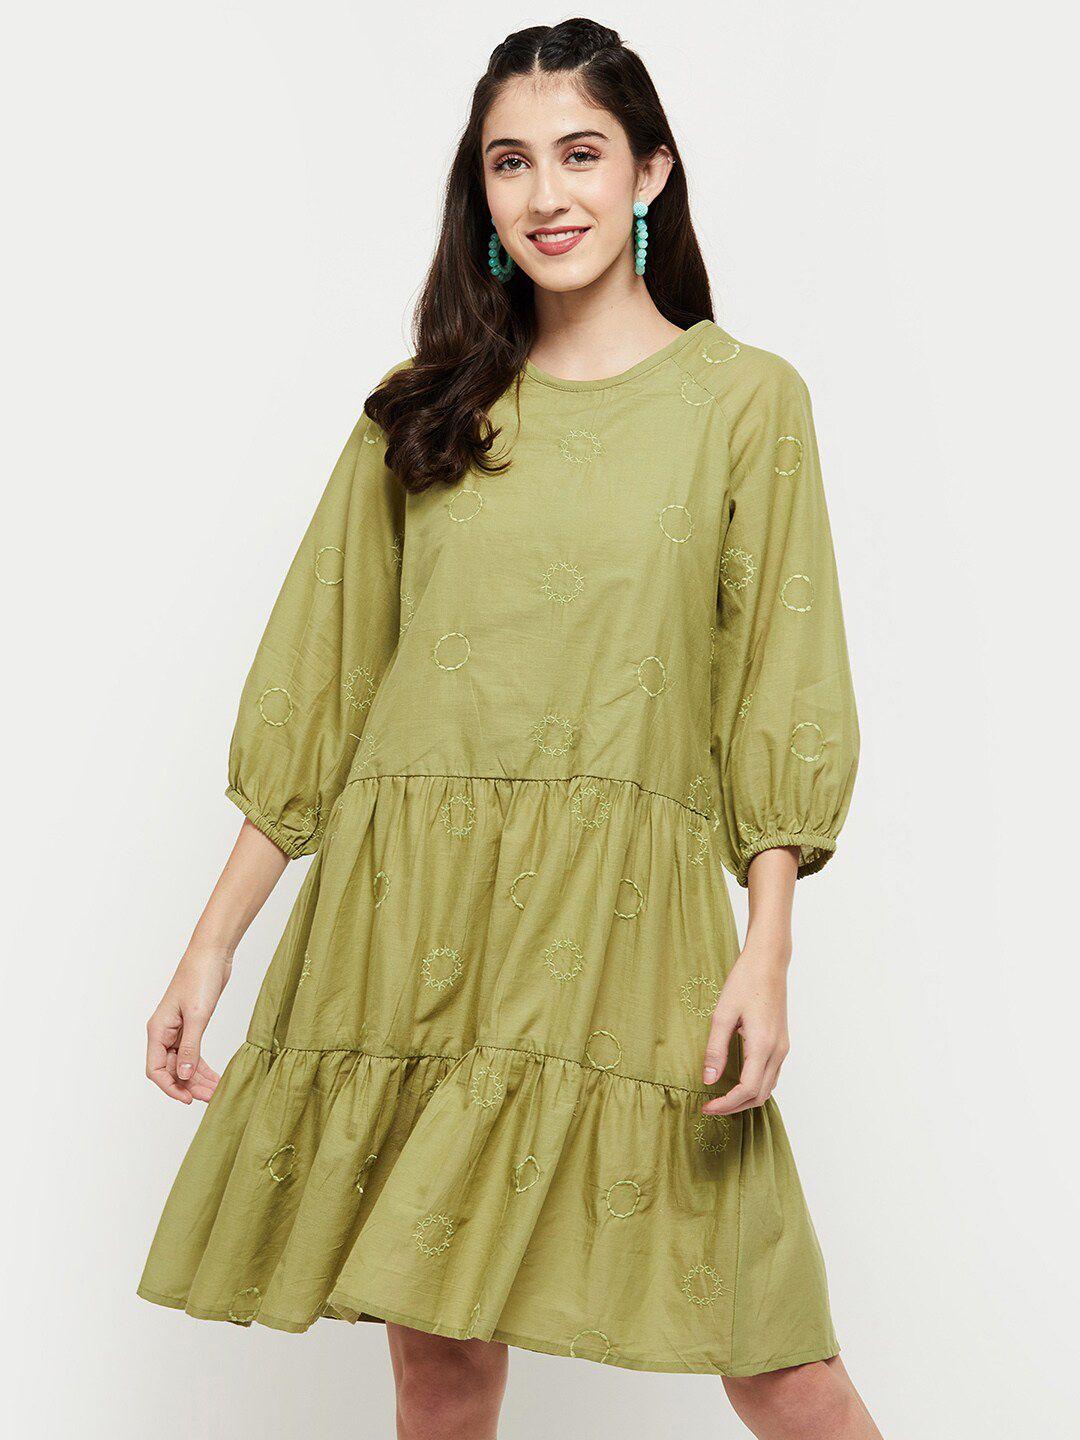 max-green-geometric-embroidered-a-line-dress